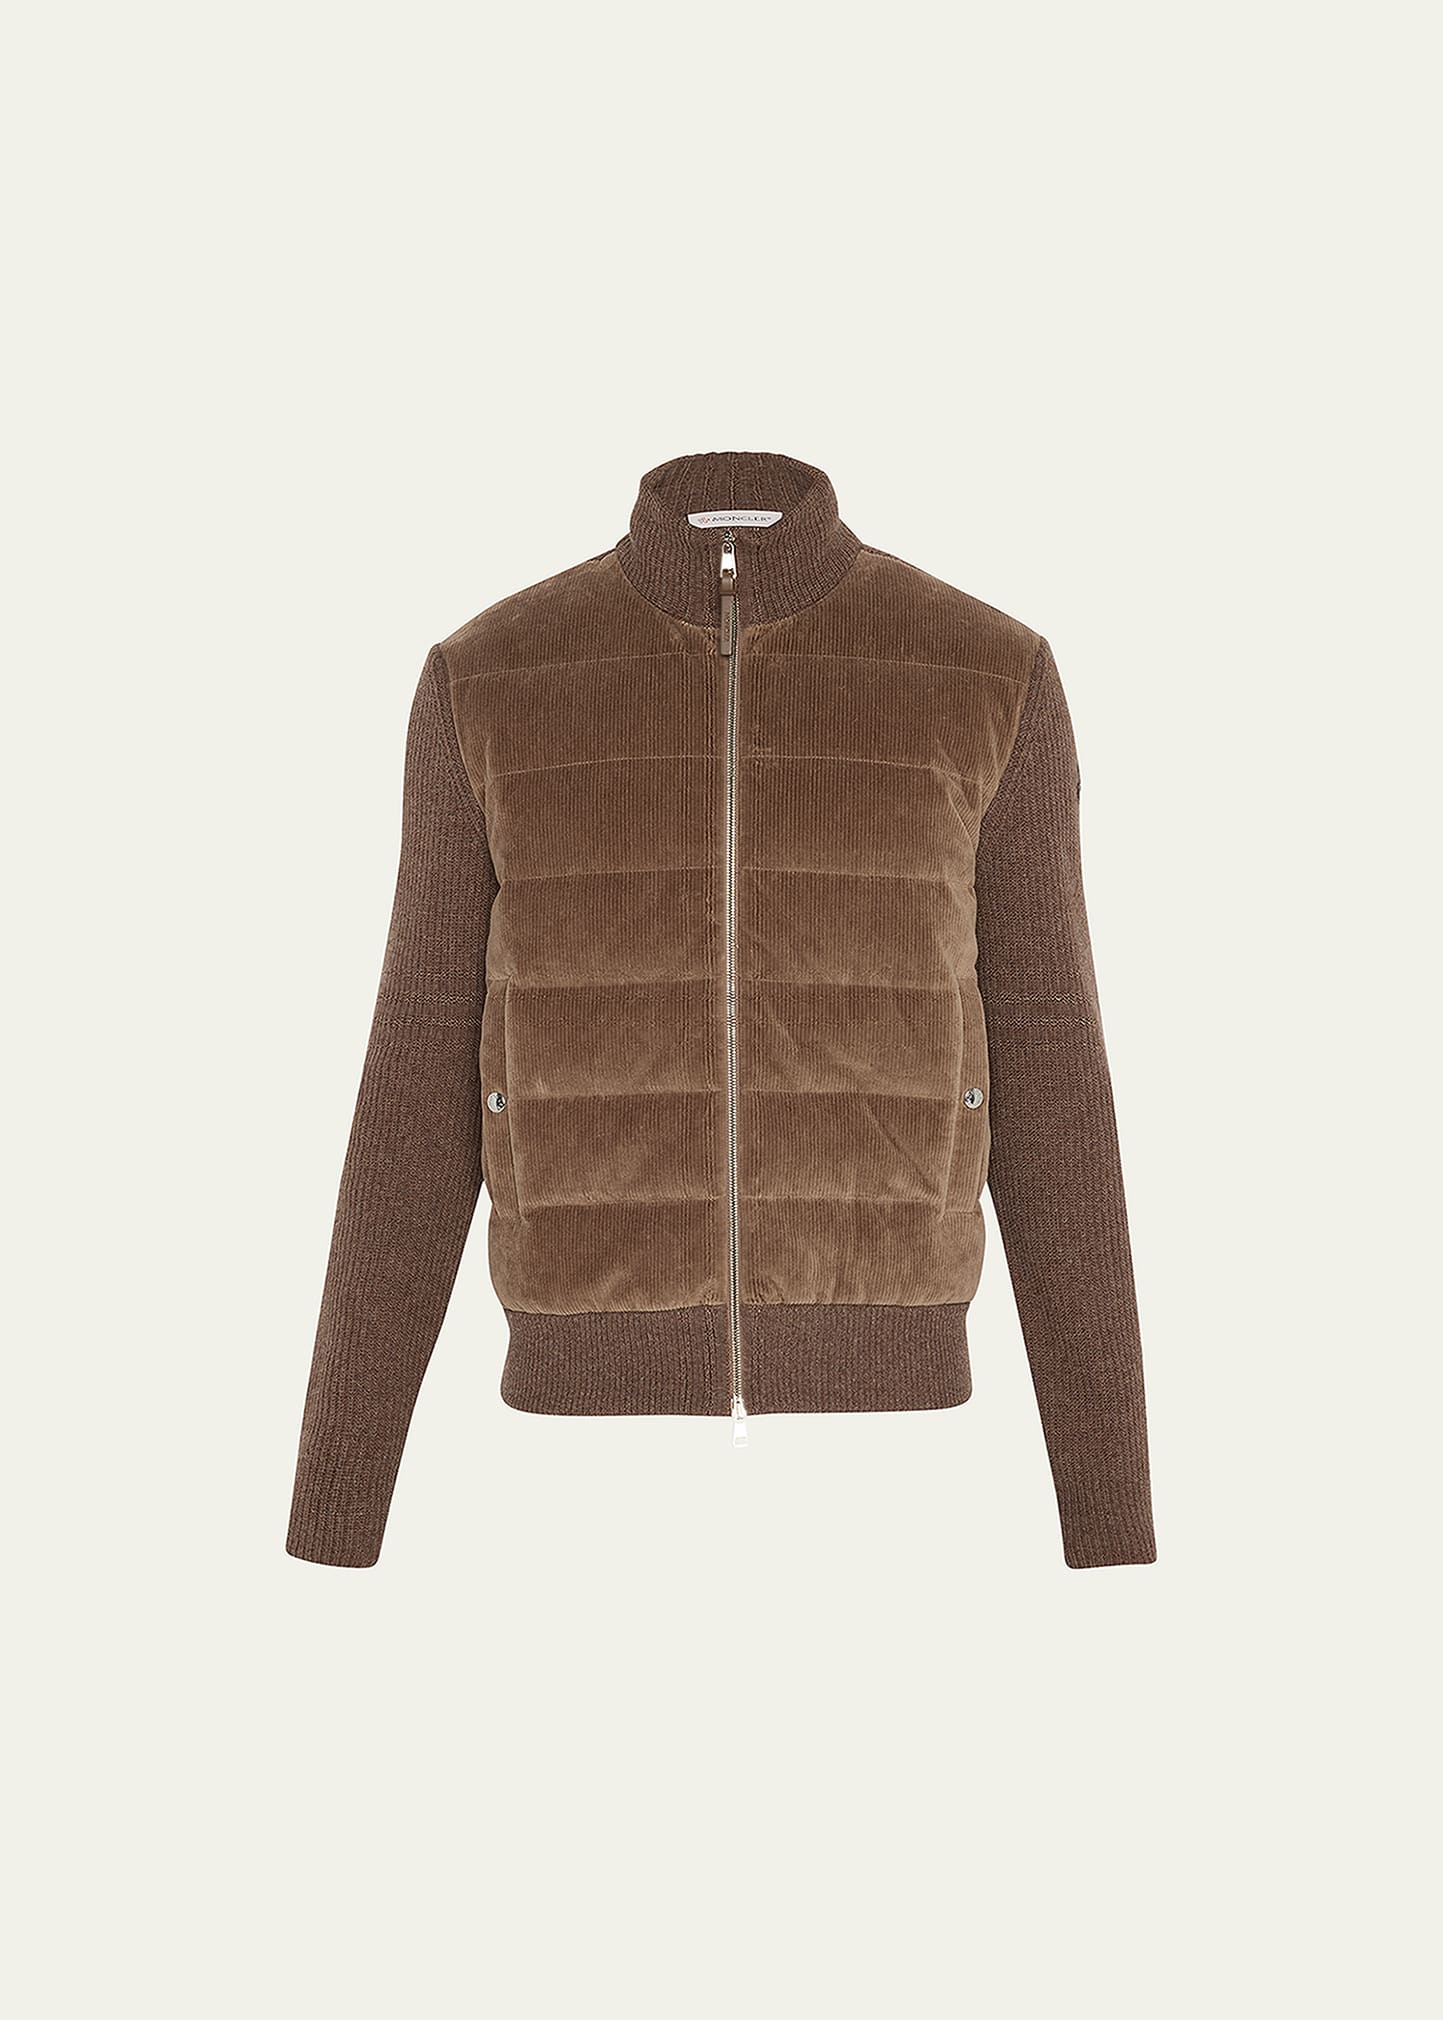 MONCLER MEN'S MARLED DOWN KNIT SWEATER